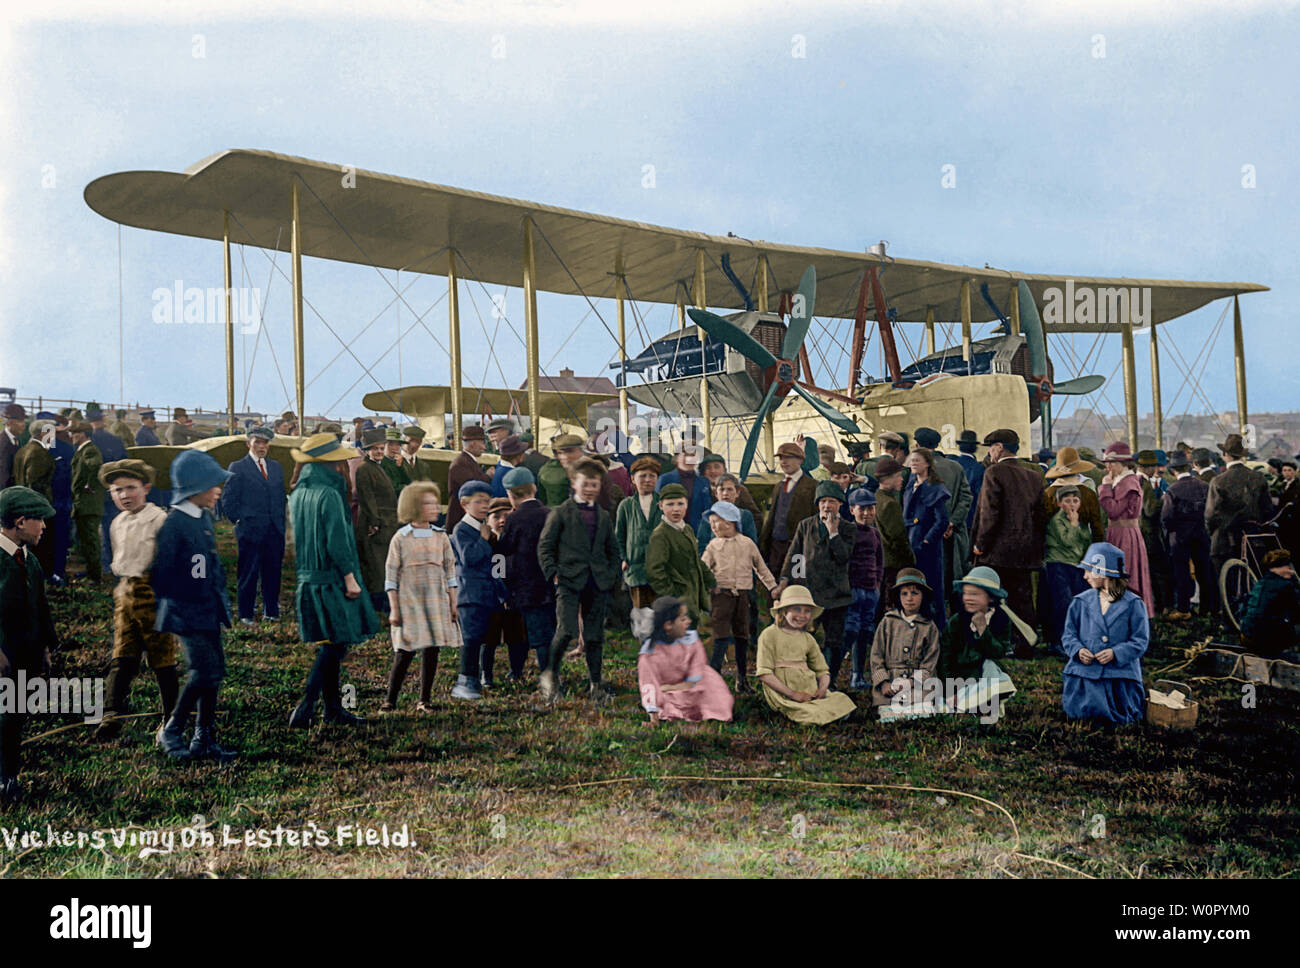 The plane of Alcock and Brown before takeoff from St. John's, Newfoundland in 1919. British aviators John Alcock and Arthur Brown made the first non-stop transatlantic flight in June 1919. They flew a modified First World War Vickers Vimy bomber from St. John's, Newfoundland, to Clifden, Connemara, County Galway, Ireland Stock Photo